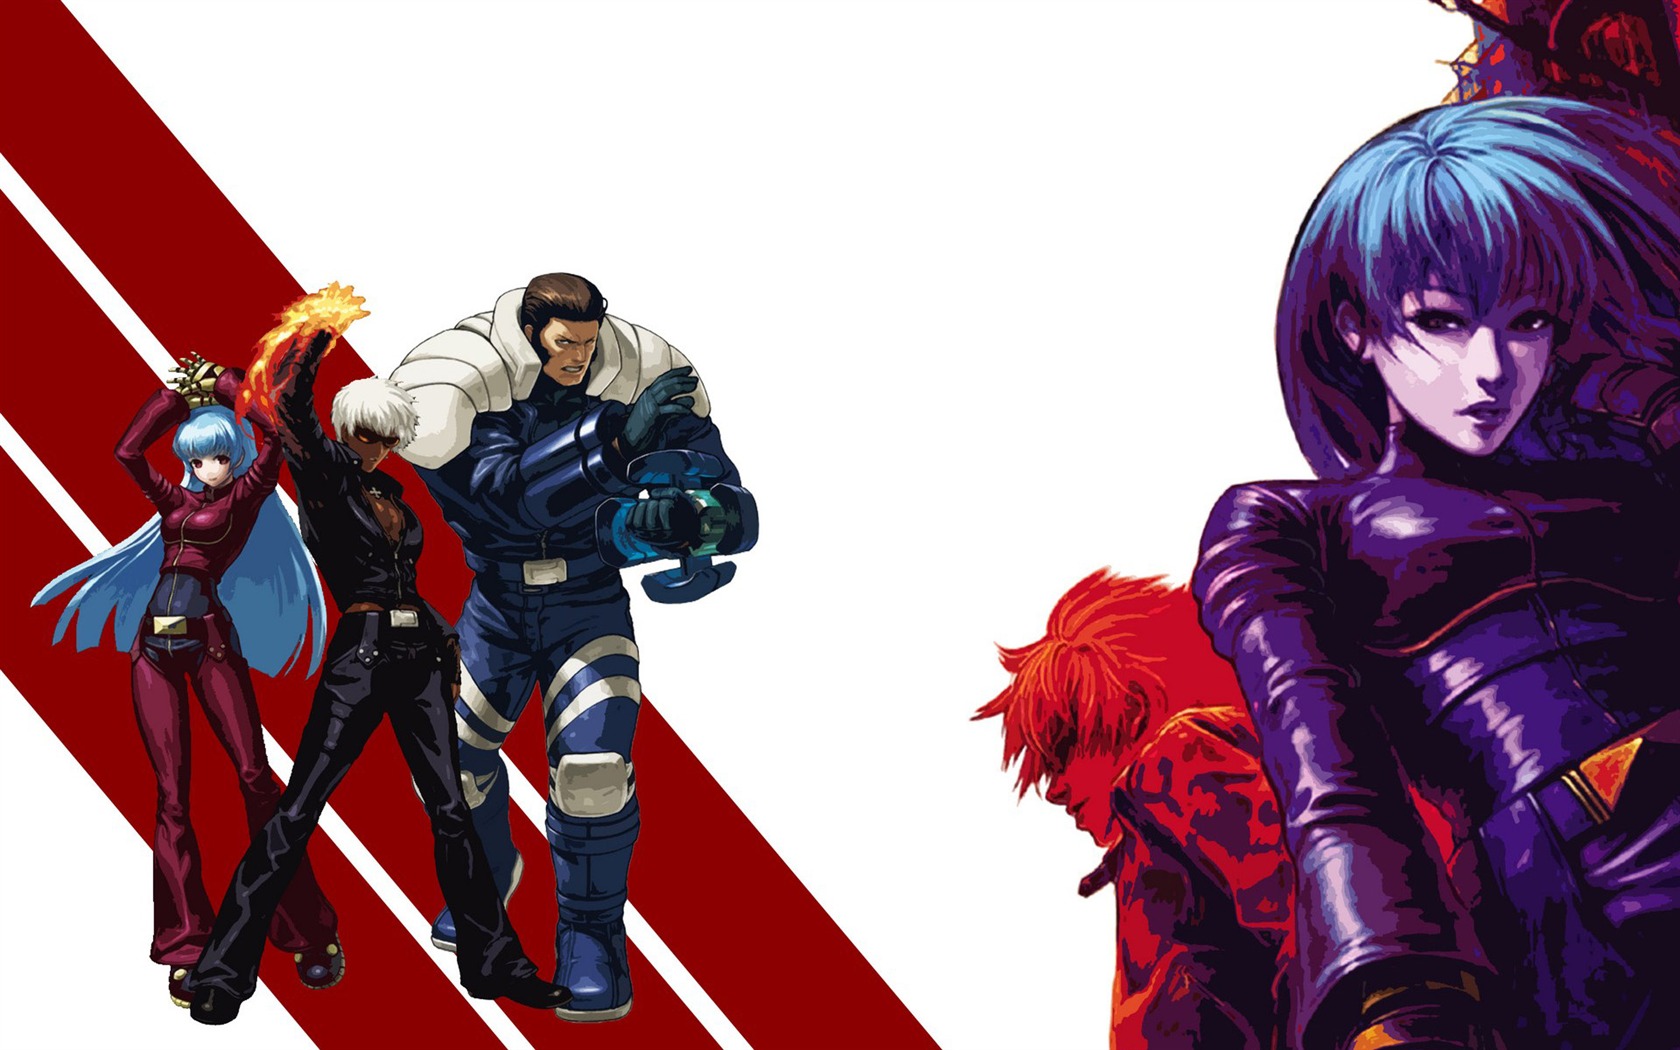 The King of Fighters XIII 拳皇13 壁纸专辑5 - 1680x1050